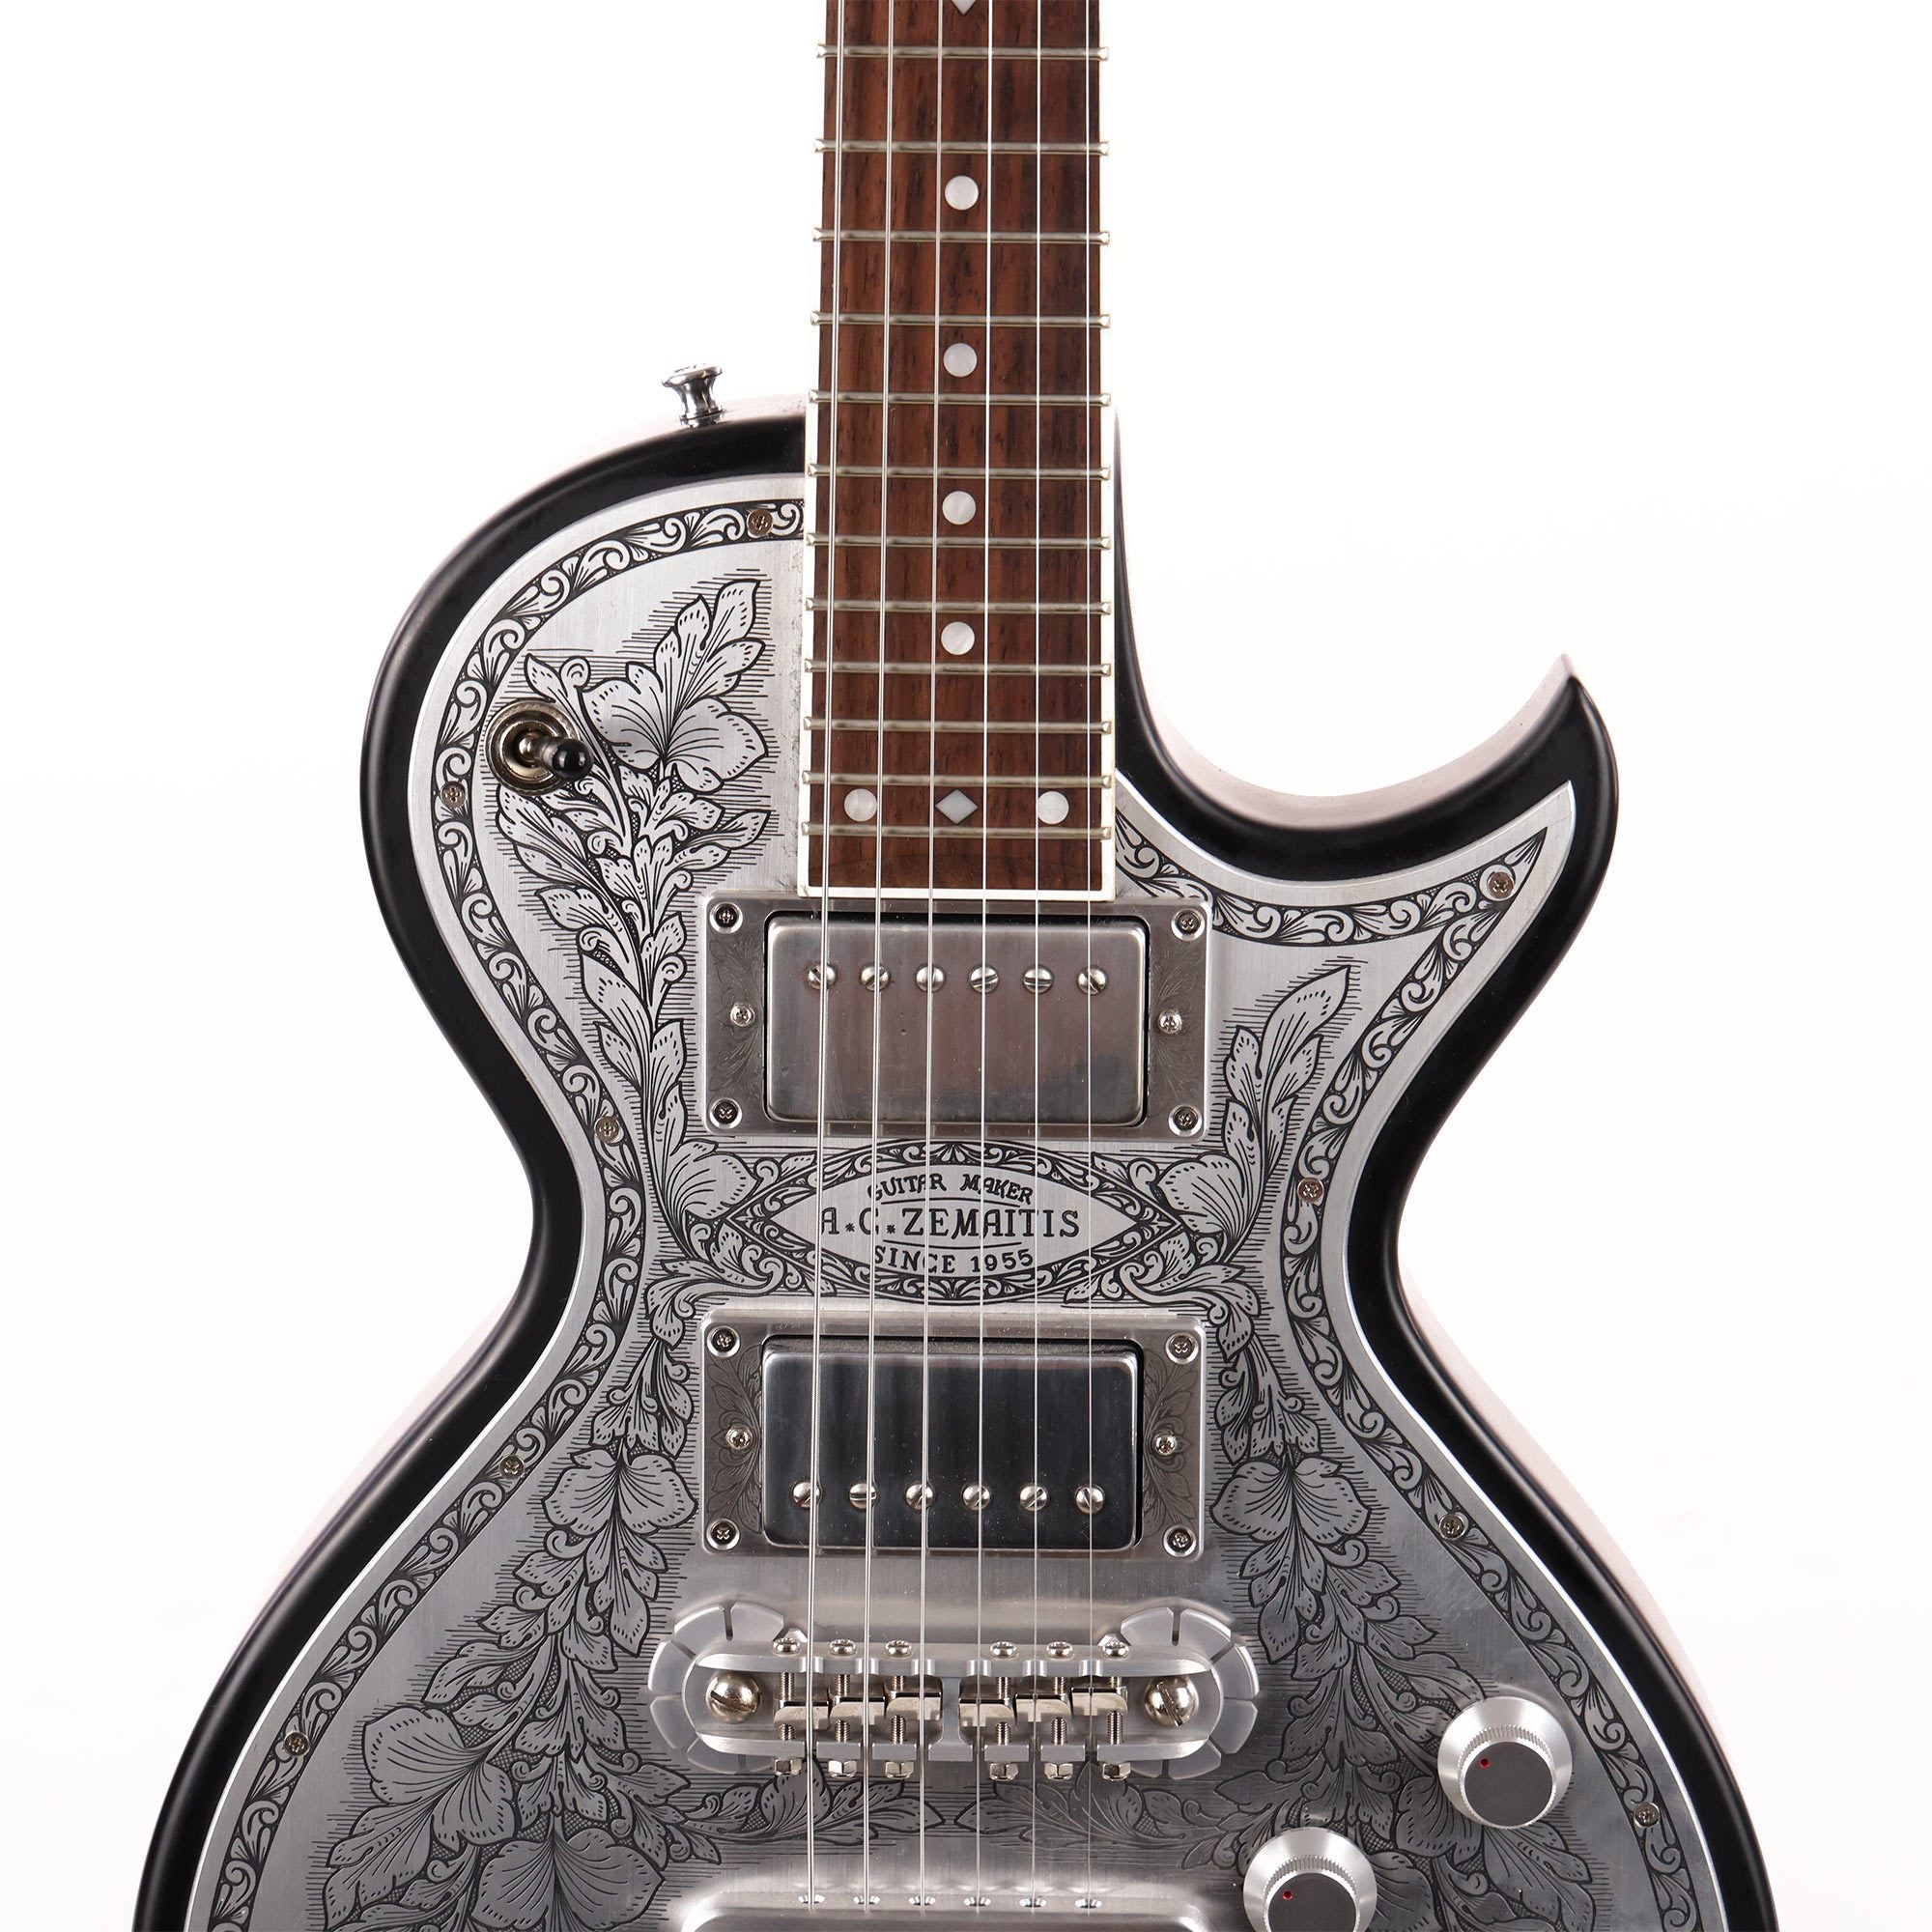 Zemaitis A24MF Dragonheart Metal Front Guitar 2016 | The Music Zoo